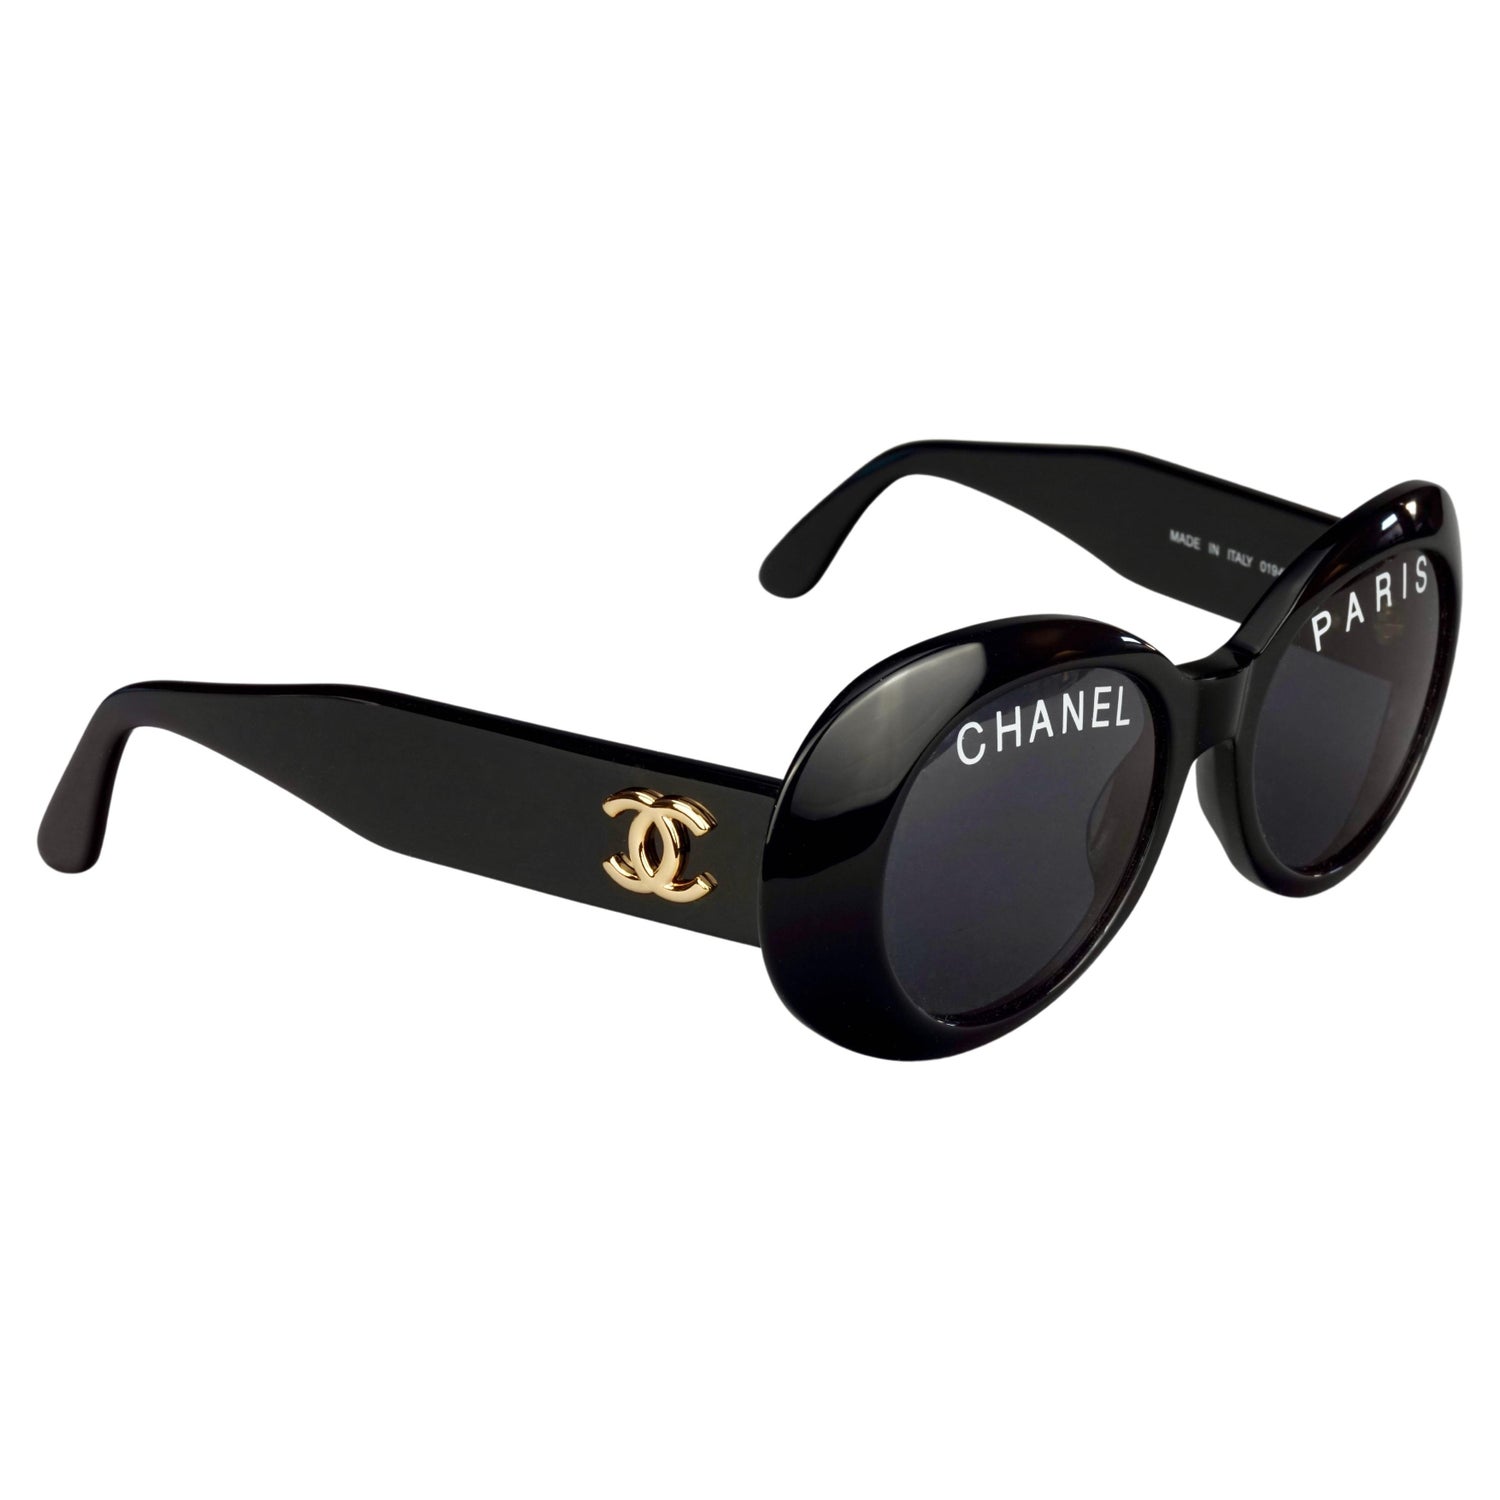 Chanel 1993 Sunglasses - 13 For Sale on 1stDibs  chanel circular sunglasses,  chanel sunglasses, chanel paris sunglasses round